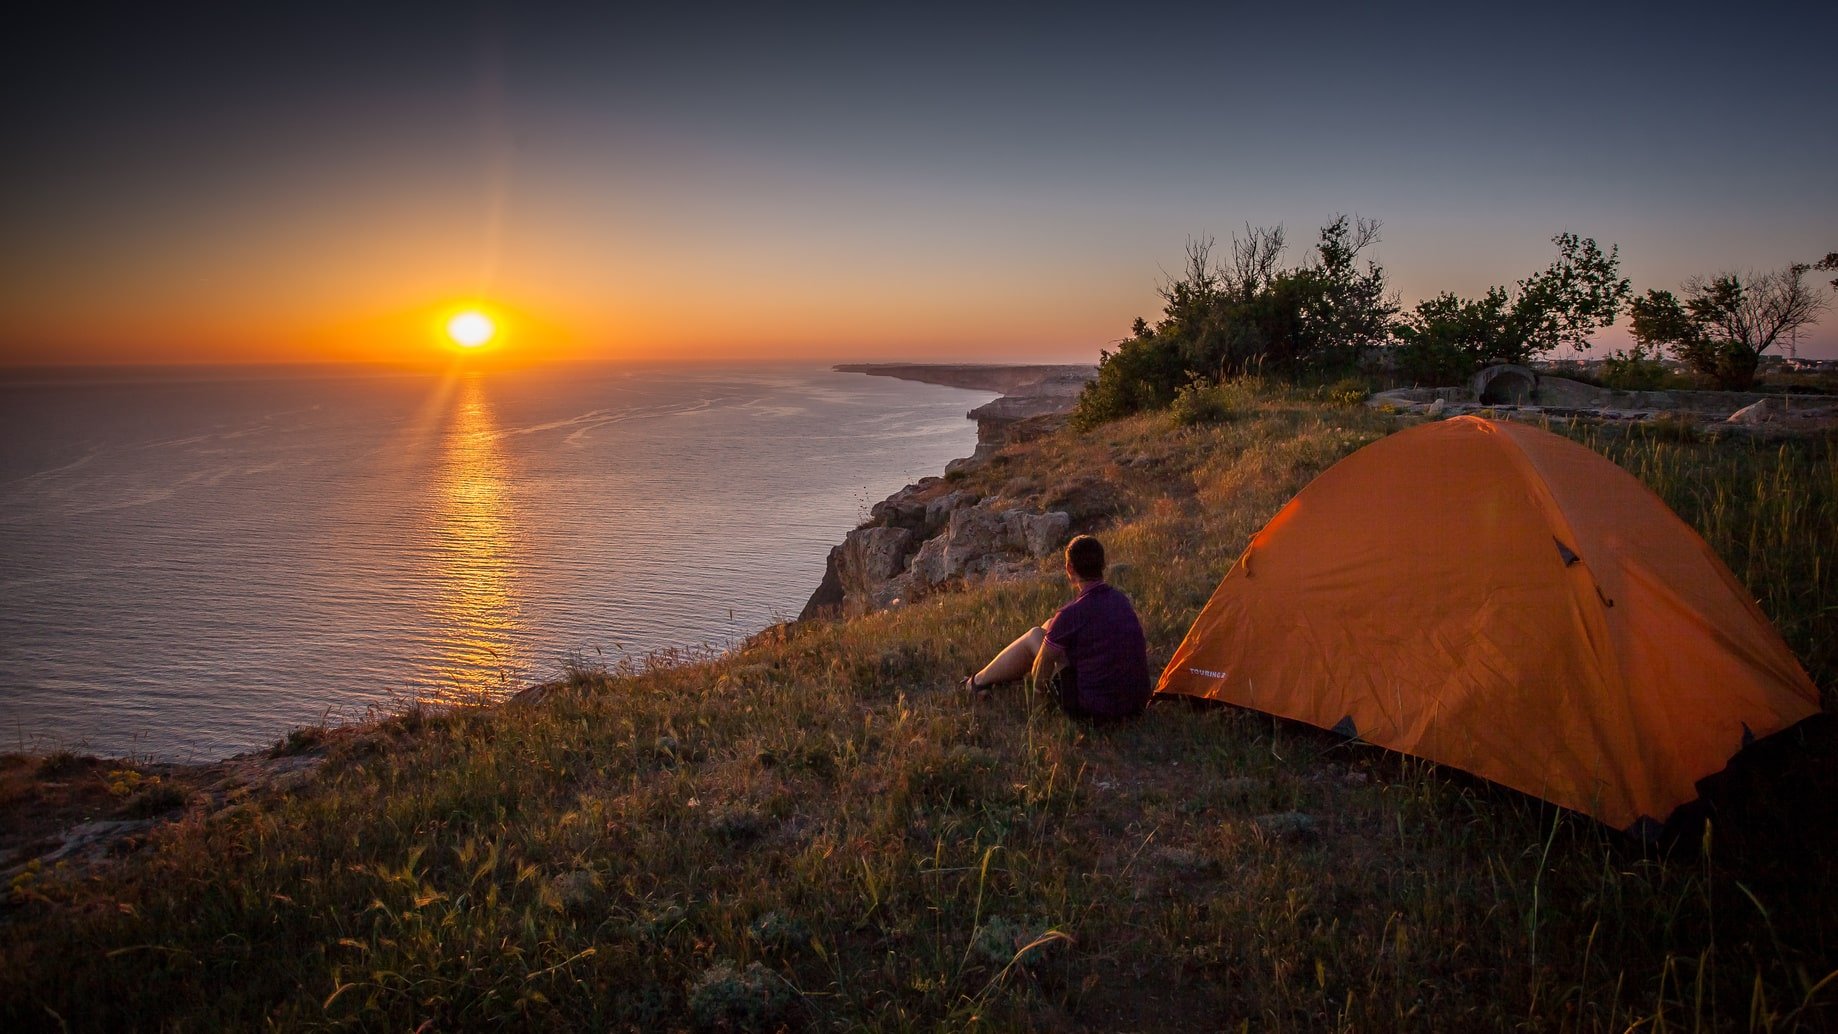 Great American Campout - person sitting next to tent watching a sunset over the ocean